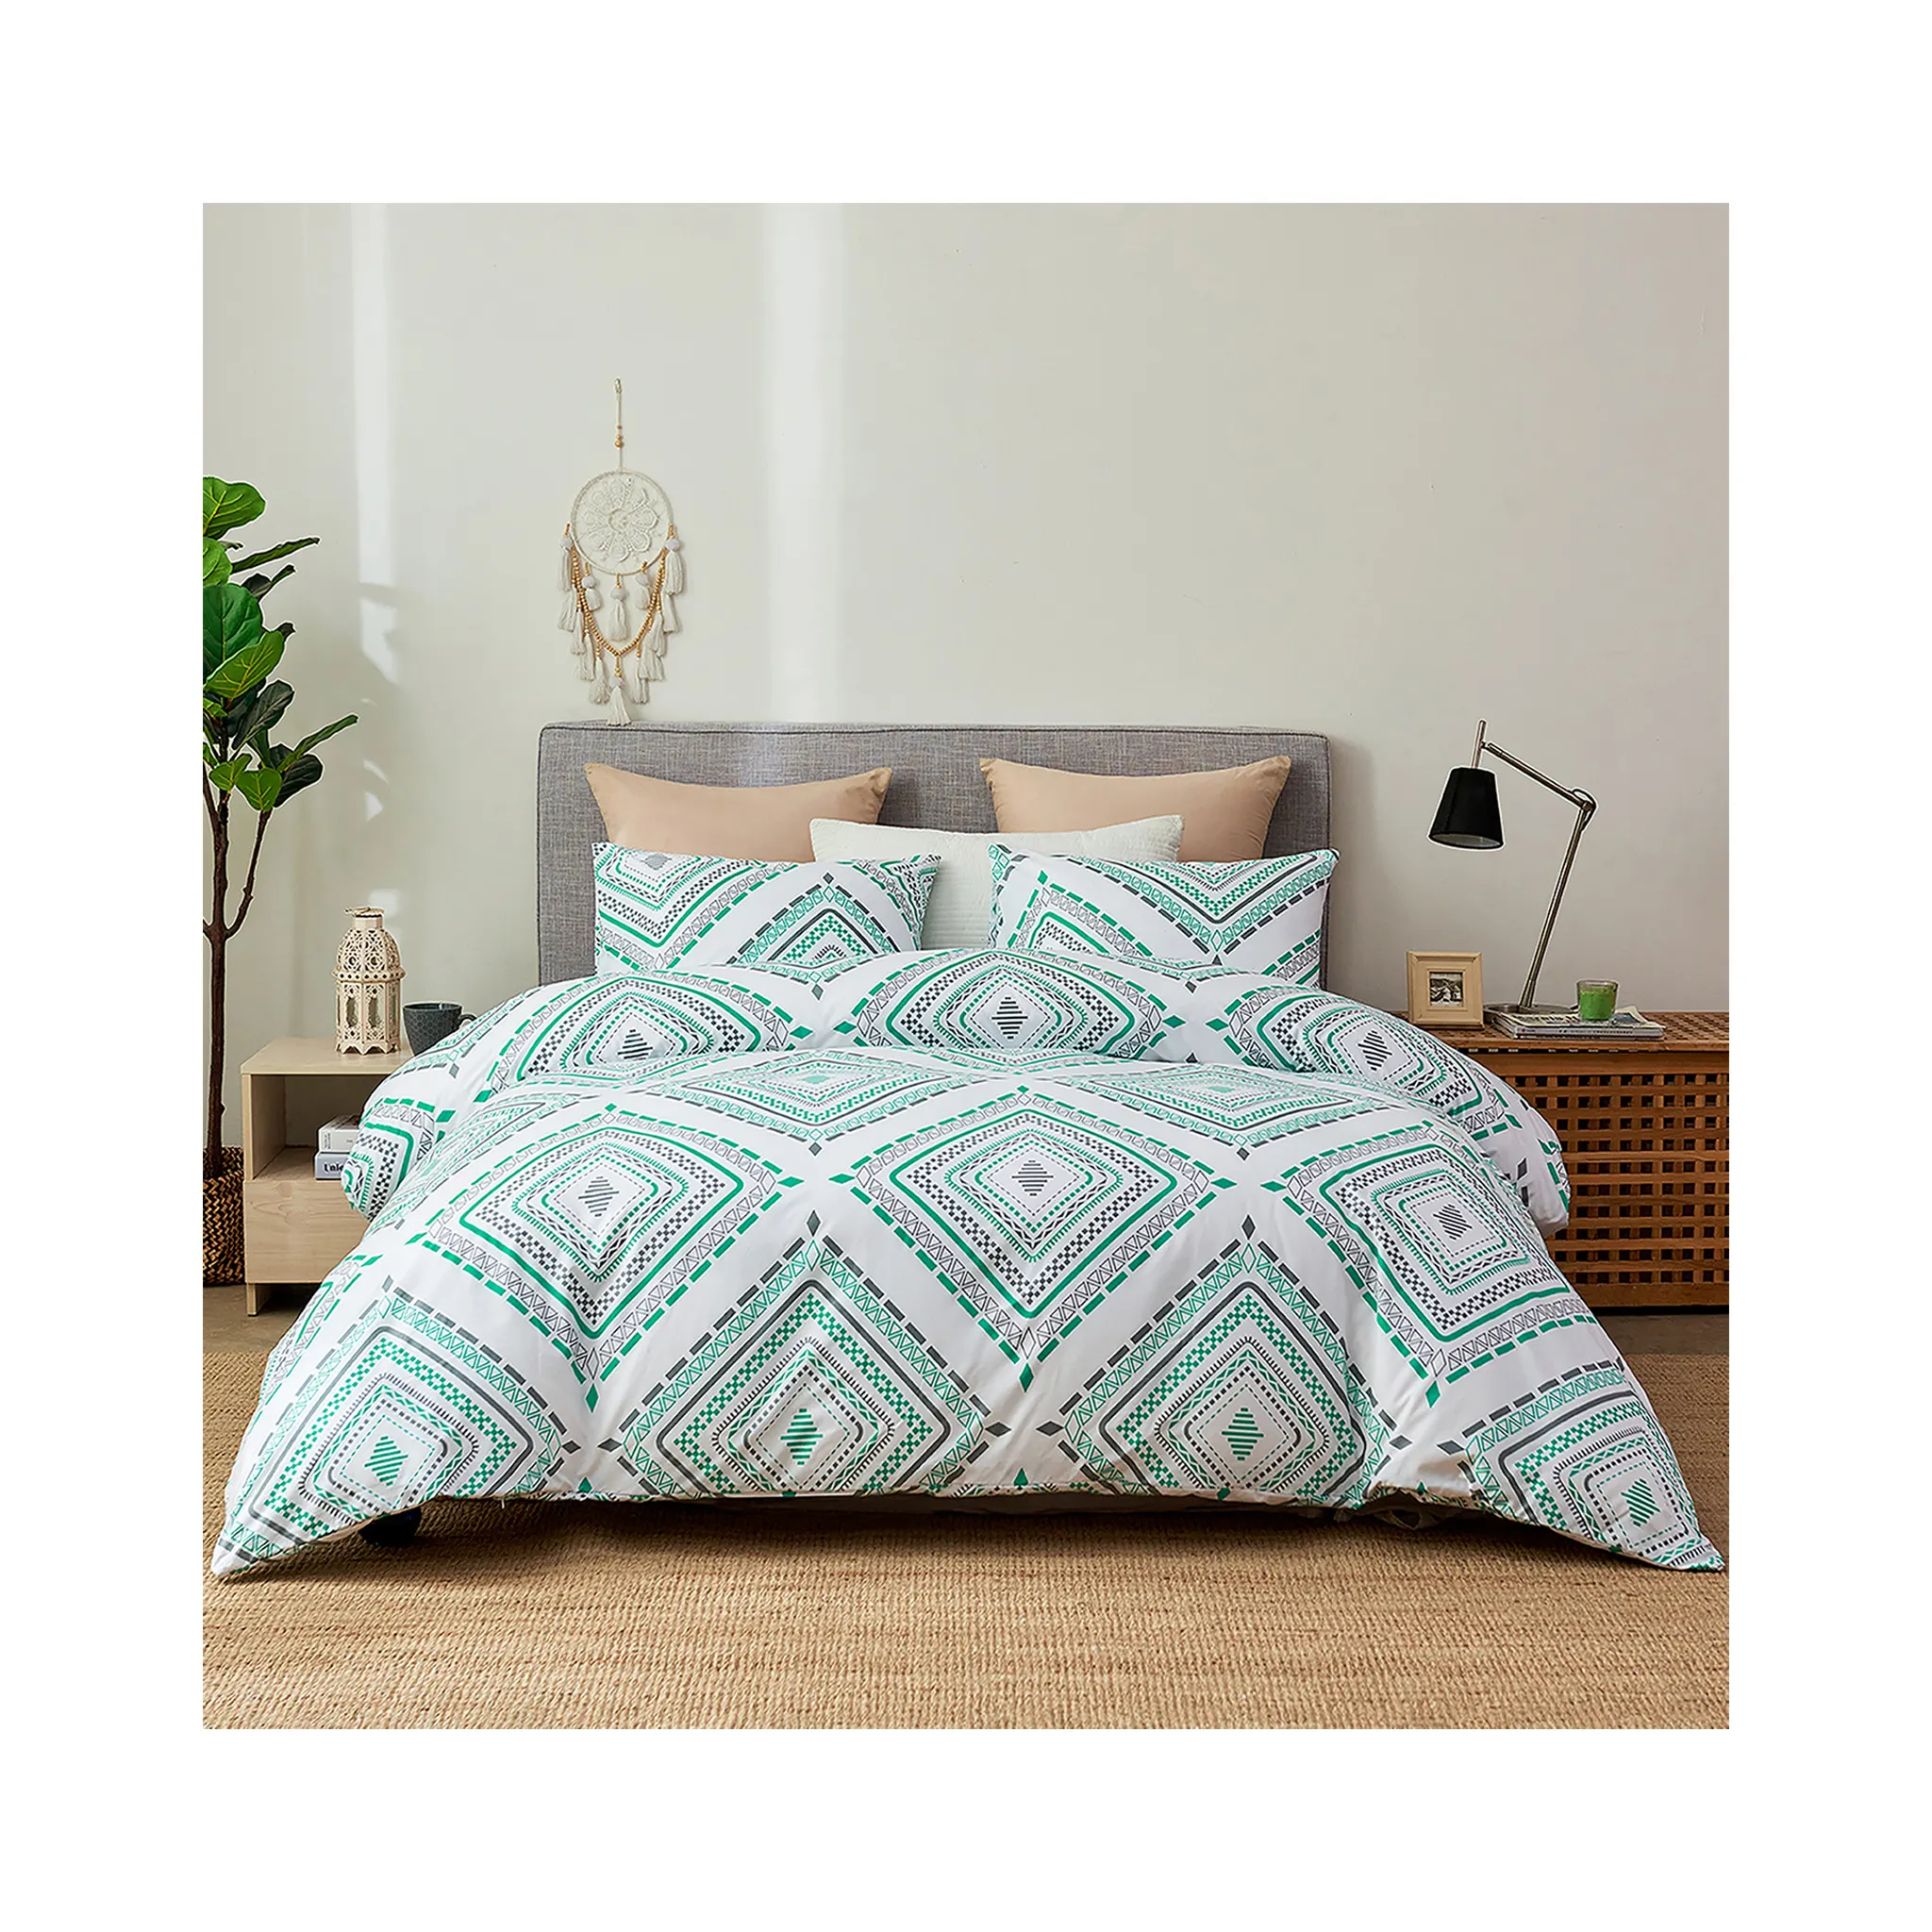 Hot Selling Stylish 3 Pcs Duvet Cover Set Green Unique Printed Bedding Set Queen Size Lightweight Quilt Cover Set All Season